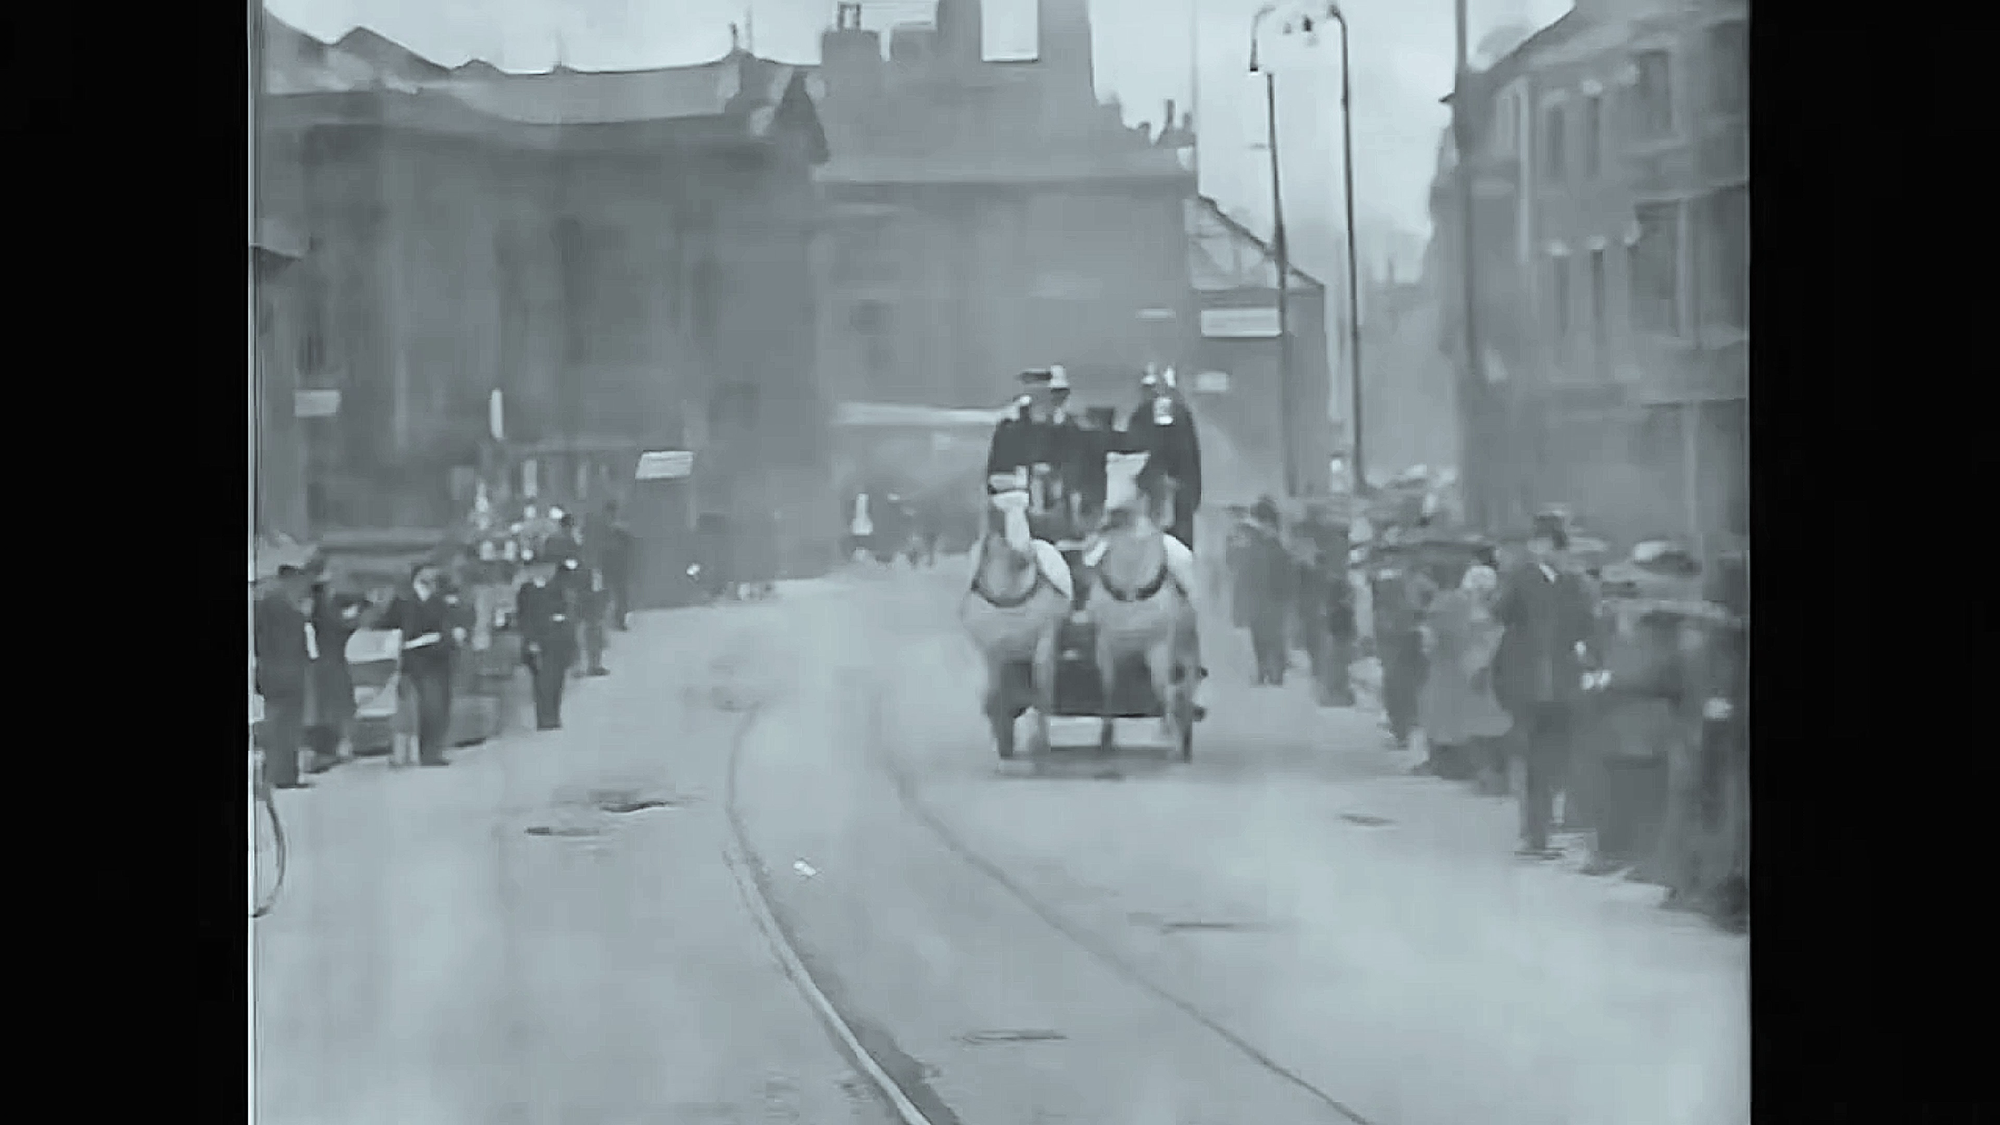 Lights, Camera, Burslem! Step into the little-known 'Hollywood' era of this historic Potteries town